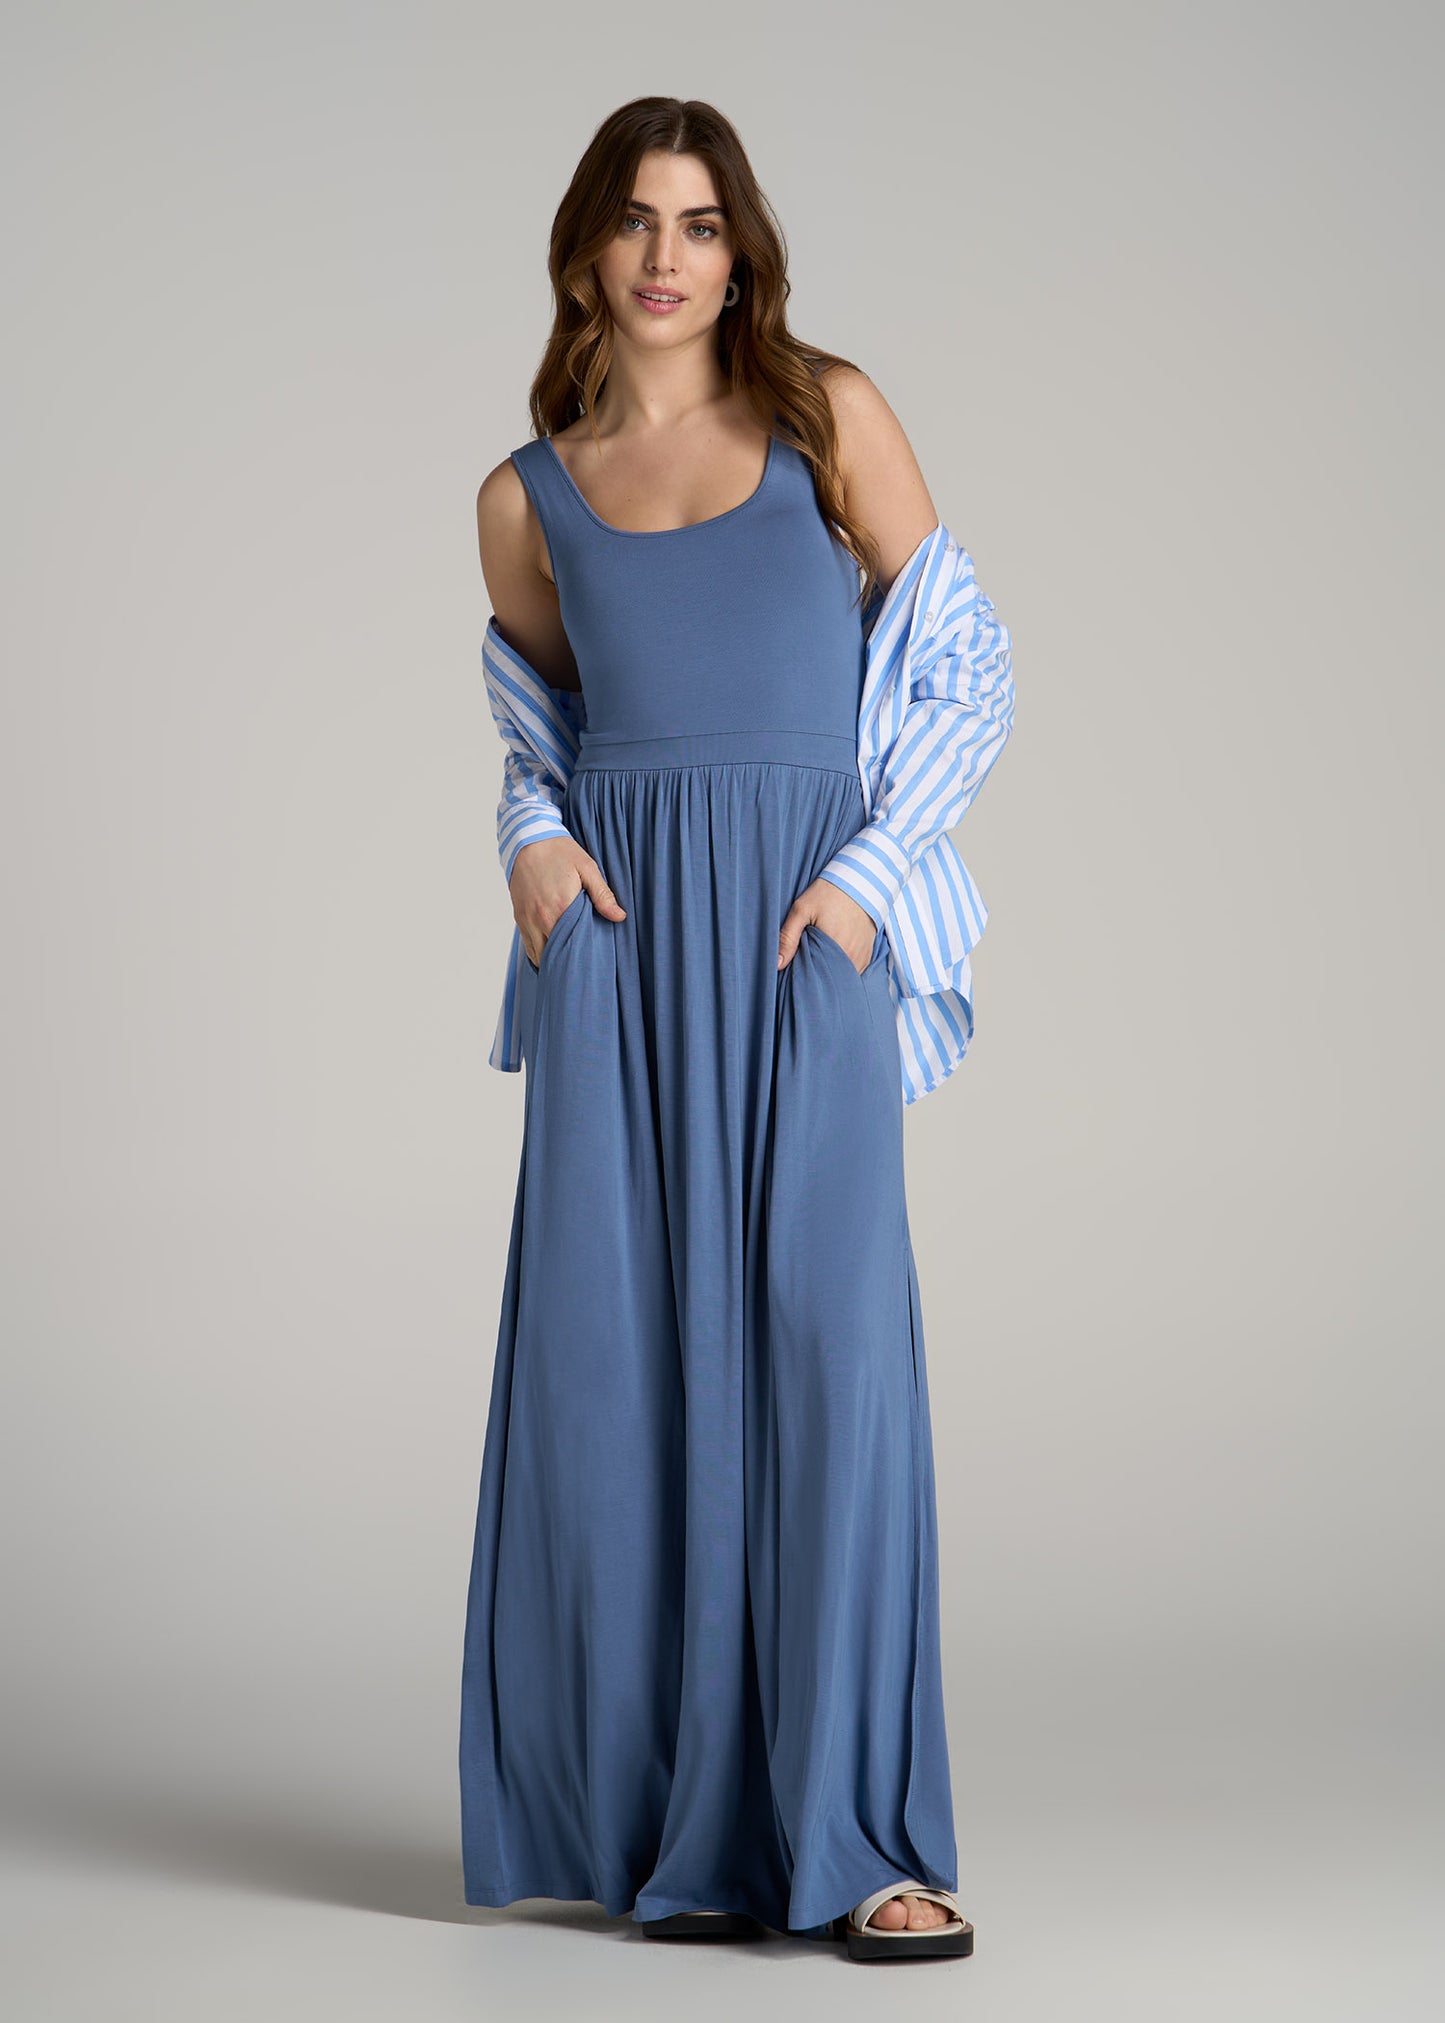 A tall woman wearing American Tall's  Jersey Tank Maxi Dress with Pockets for Tall Women in Steel Blue.